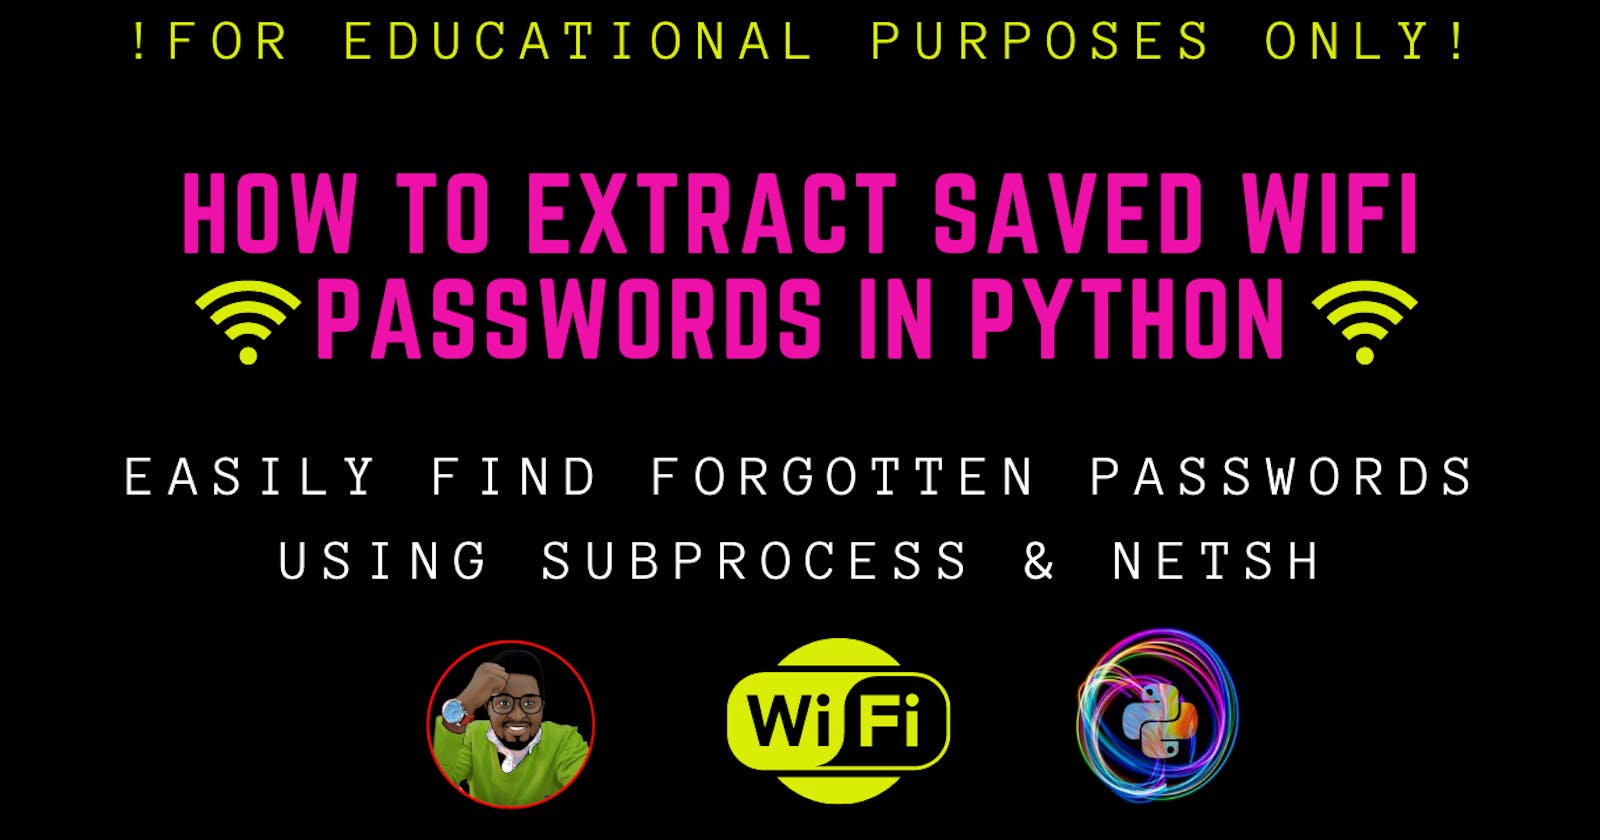 How to Extract Saved WiFi Passwords In Python